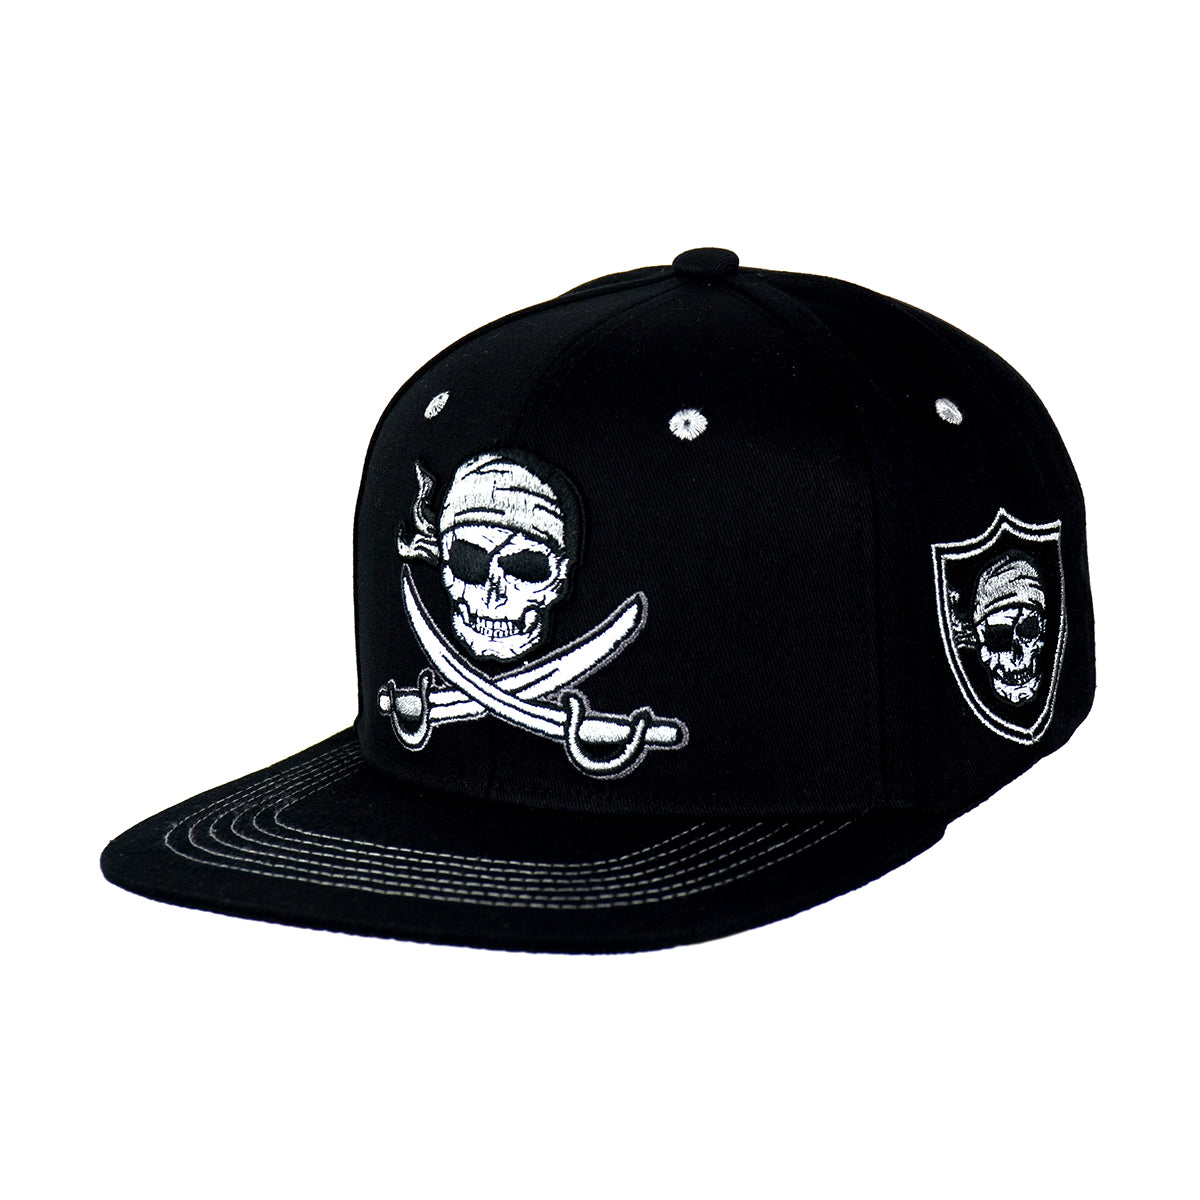 Snapback "Skull Pirate" Hat Embroidered